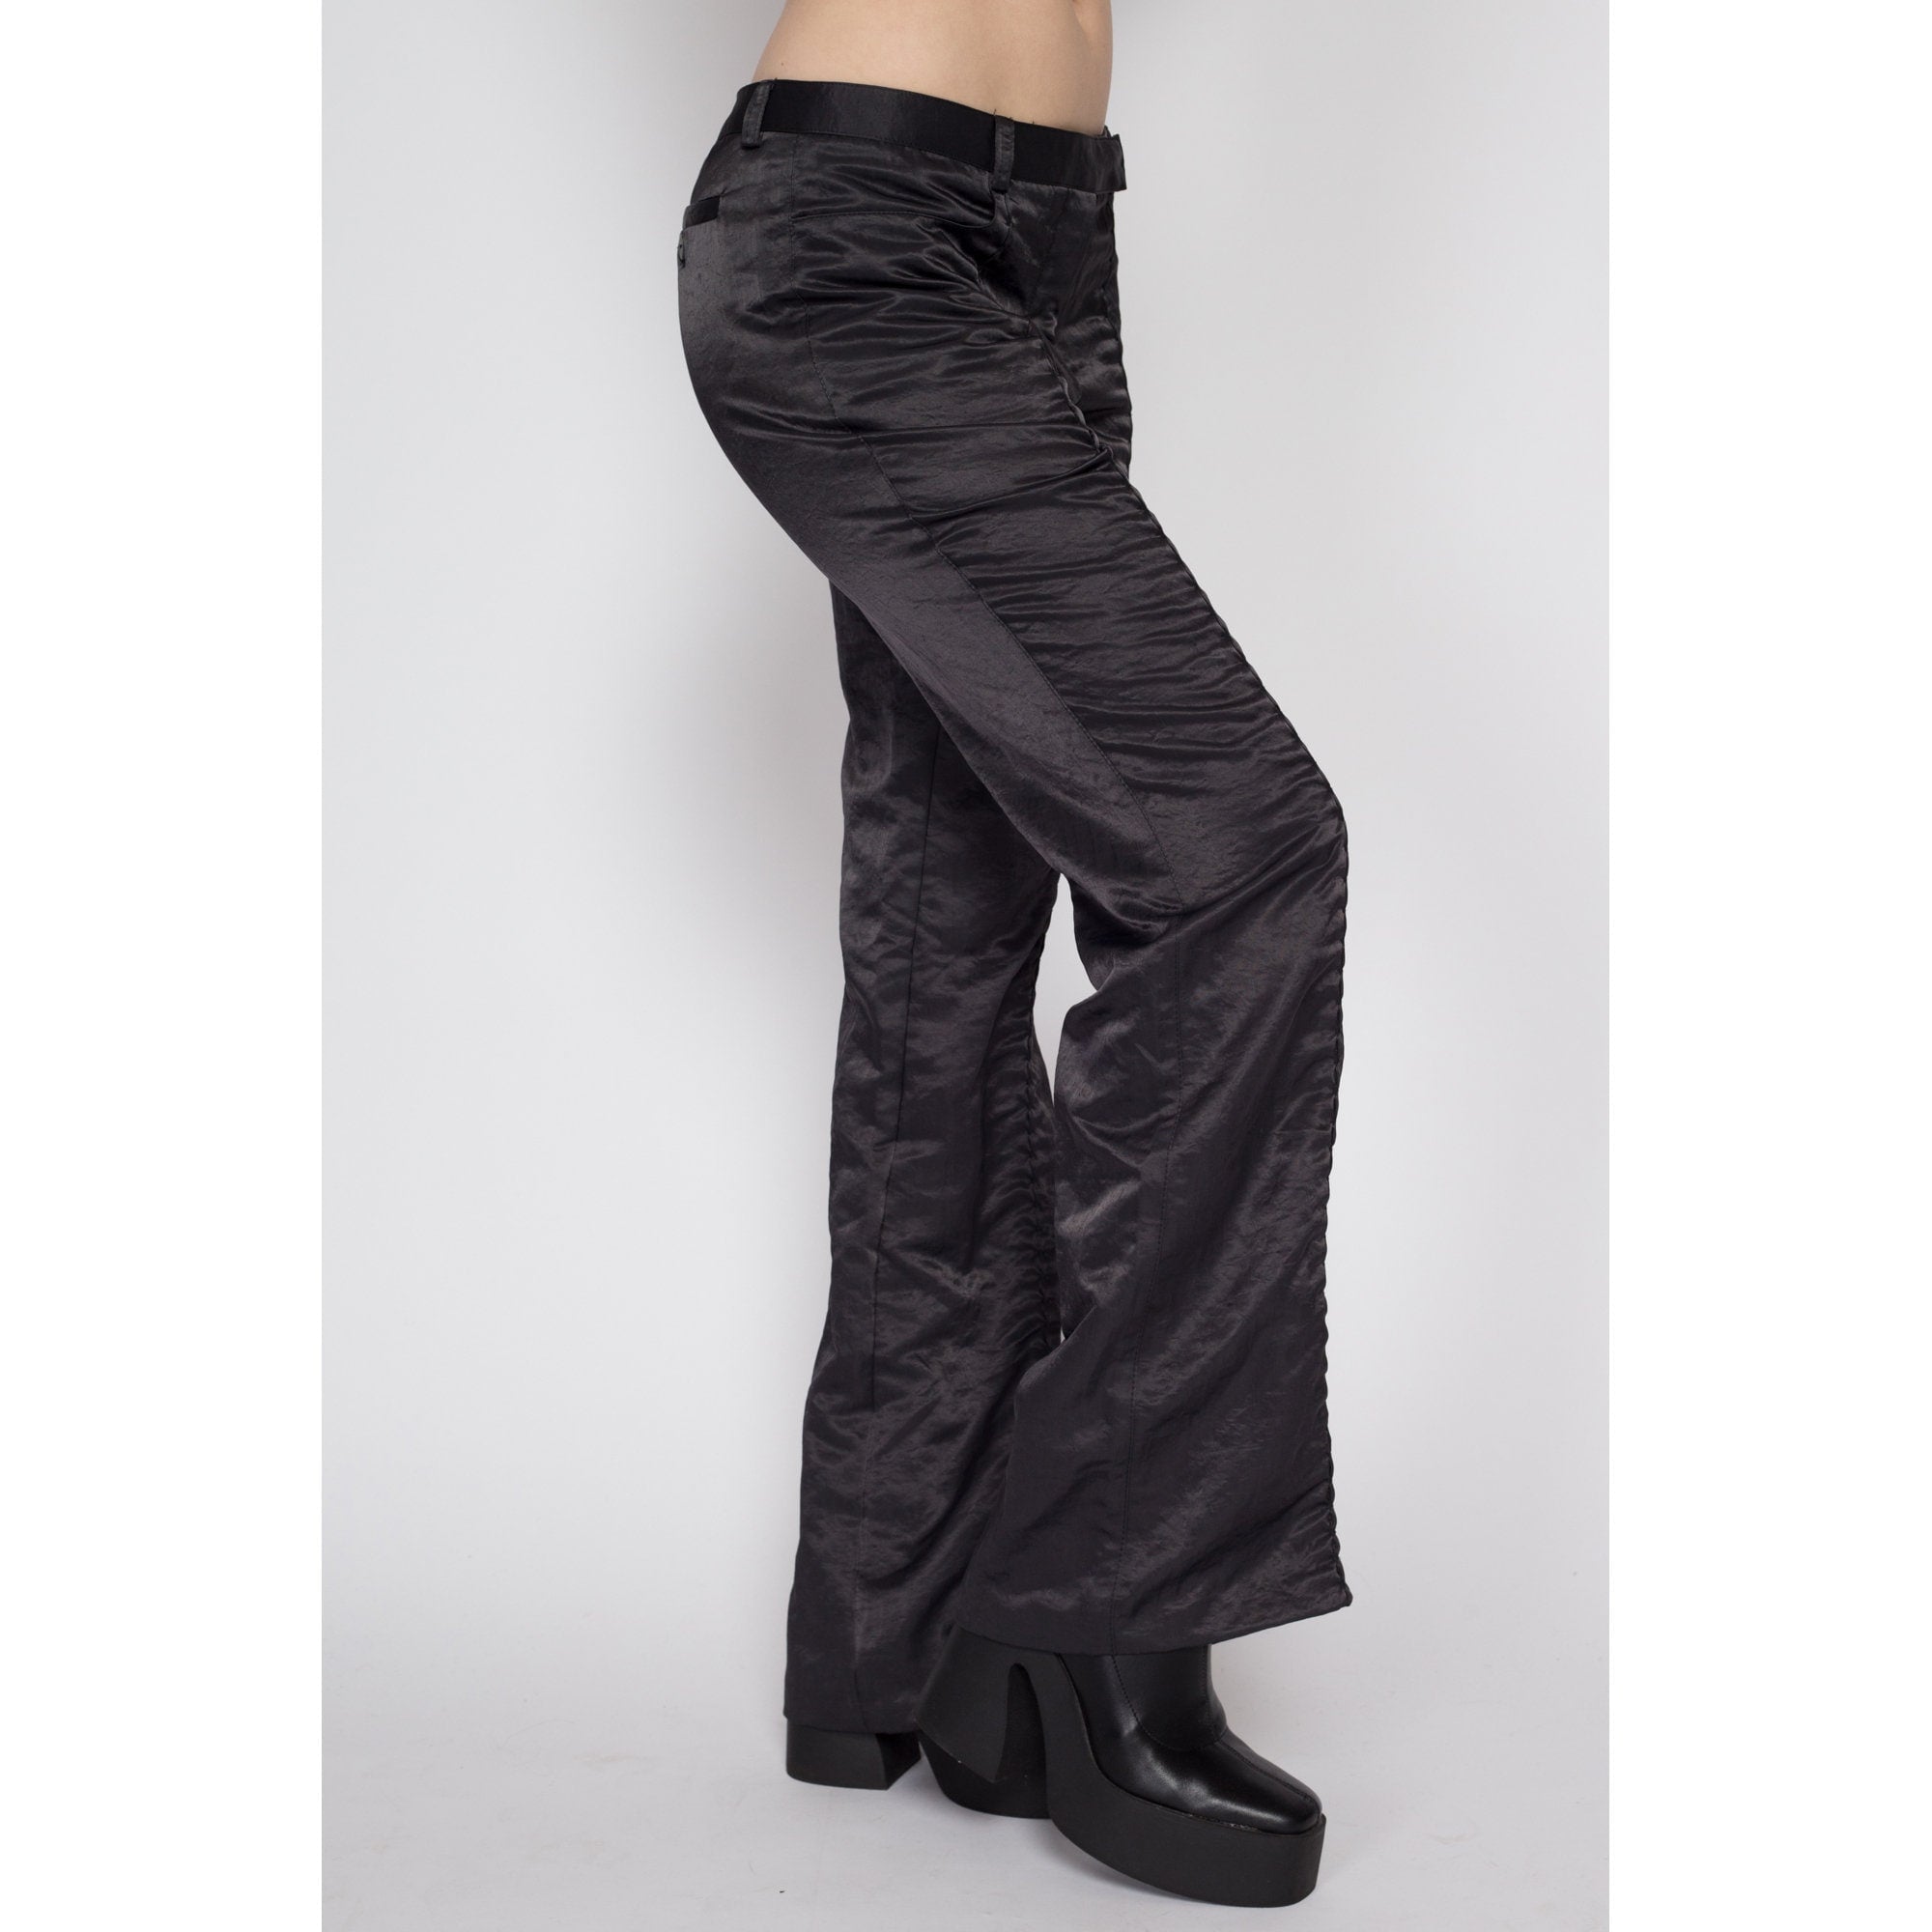 ASOS Luxe satin flare pants in brown - part of a set - ShopStyle